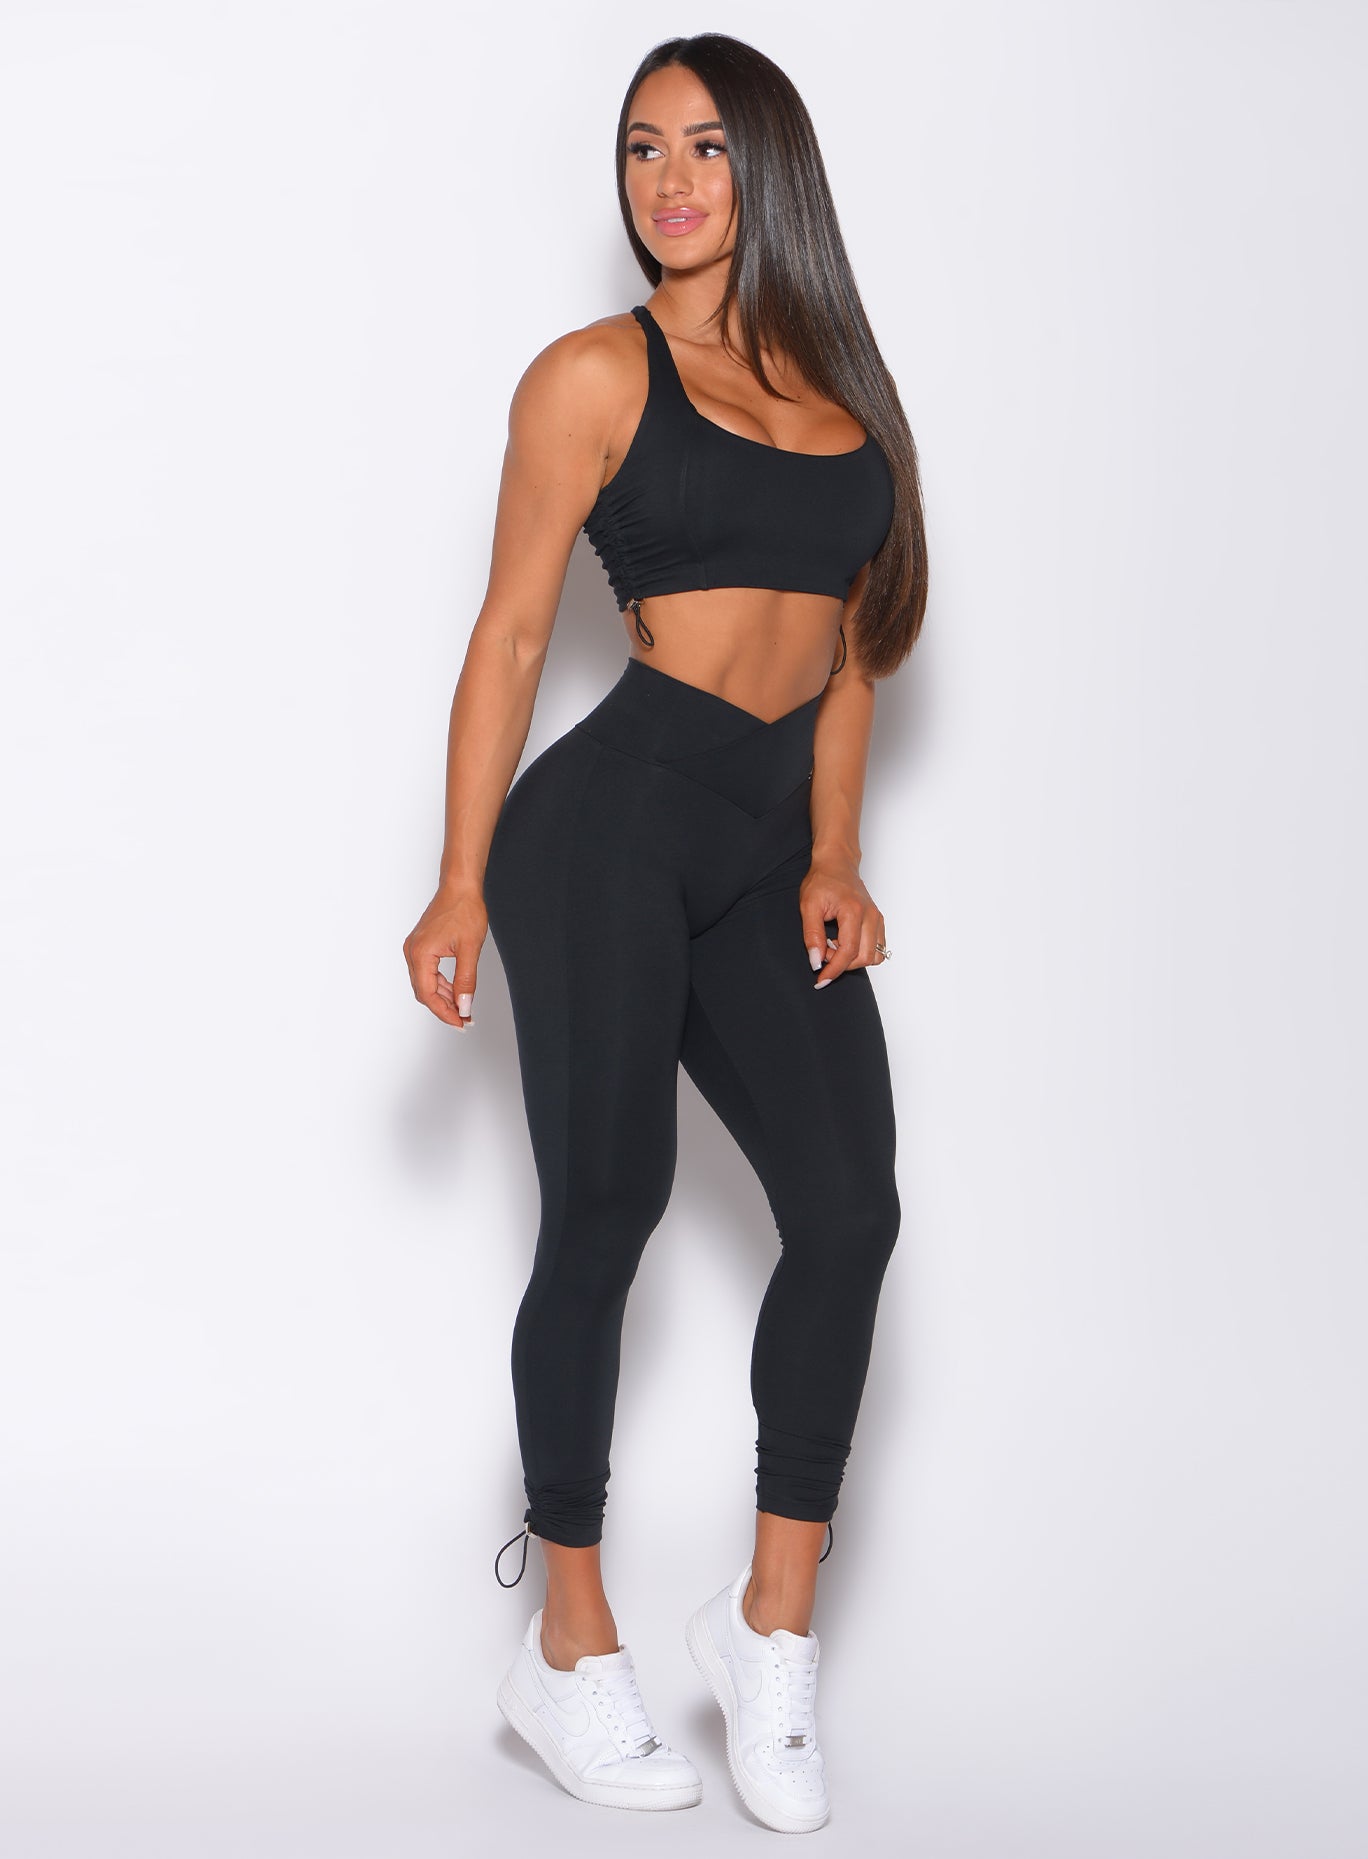 Right side profile view of a model angled slightly to her right  wearing our black toggle leggings and a sports bra 